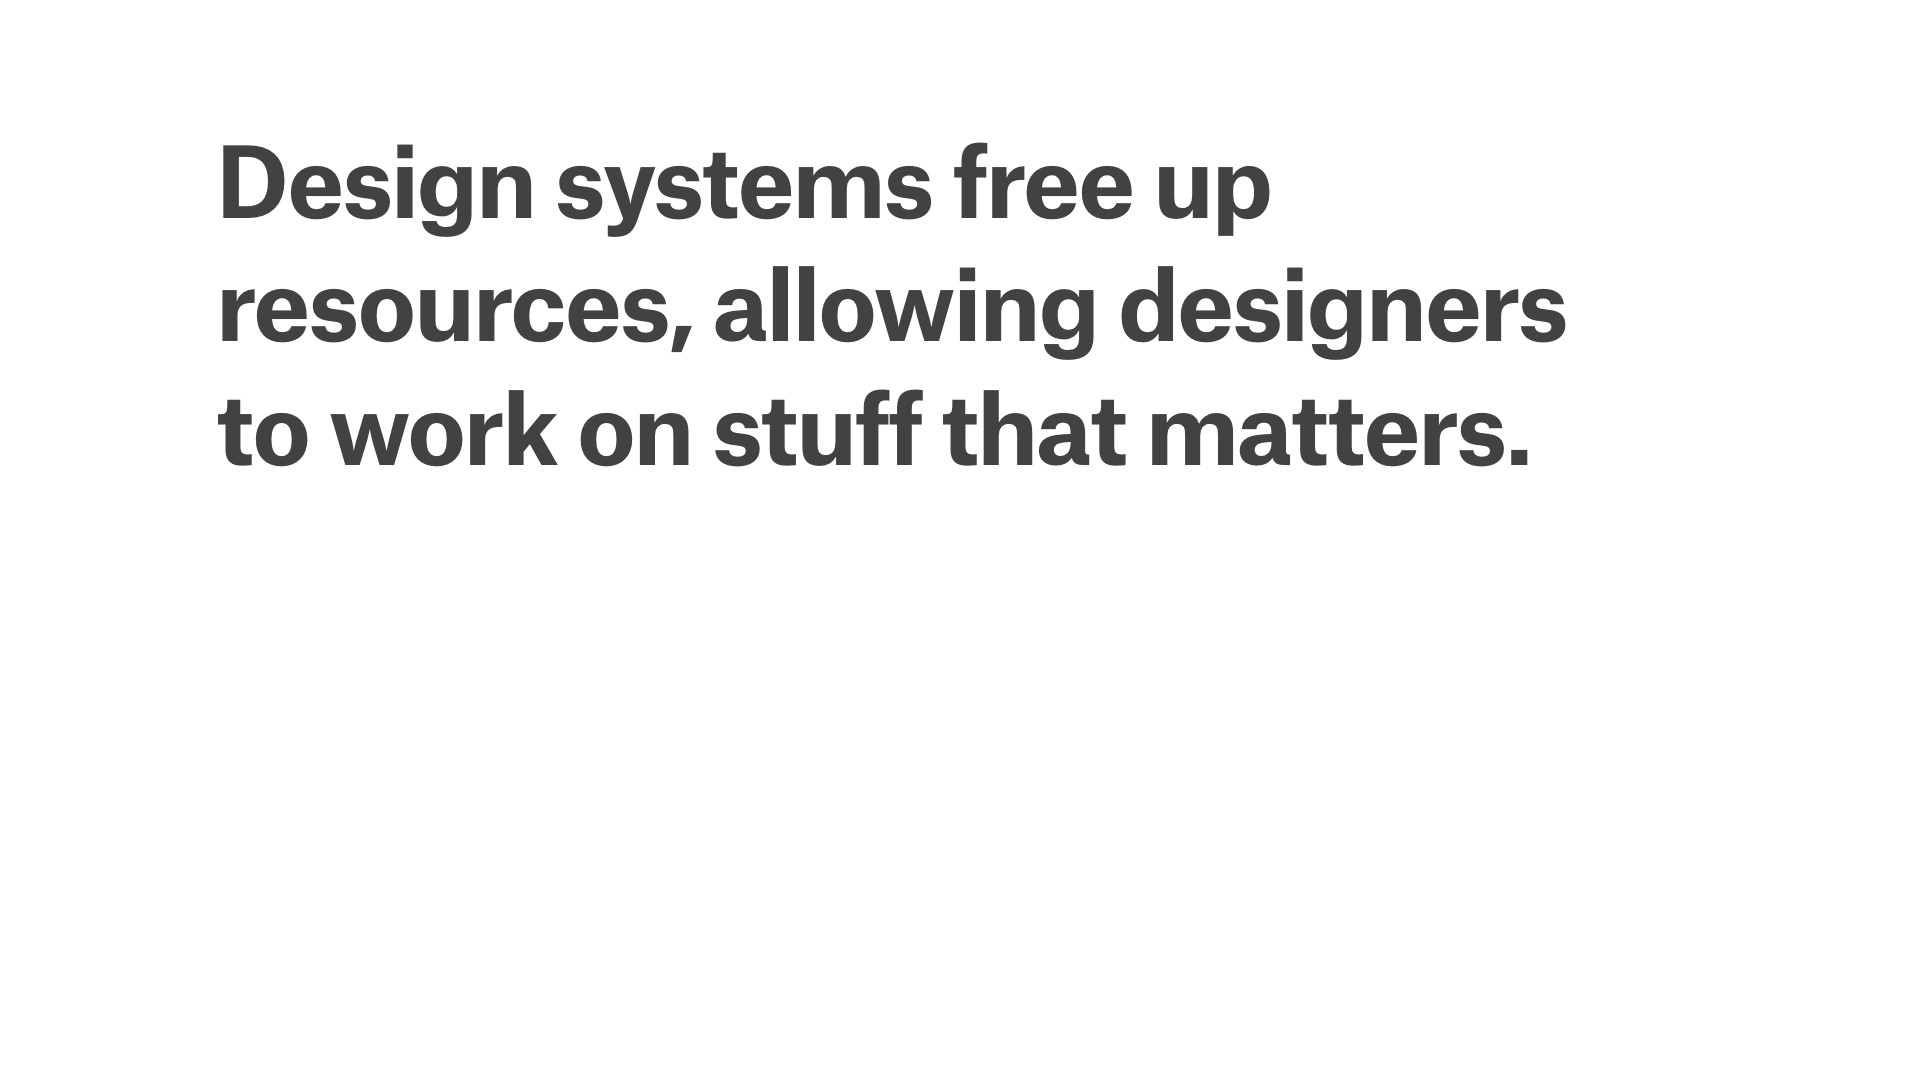 Design systems free up resources